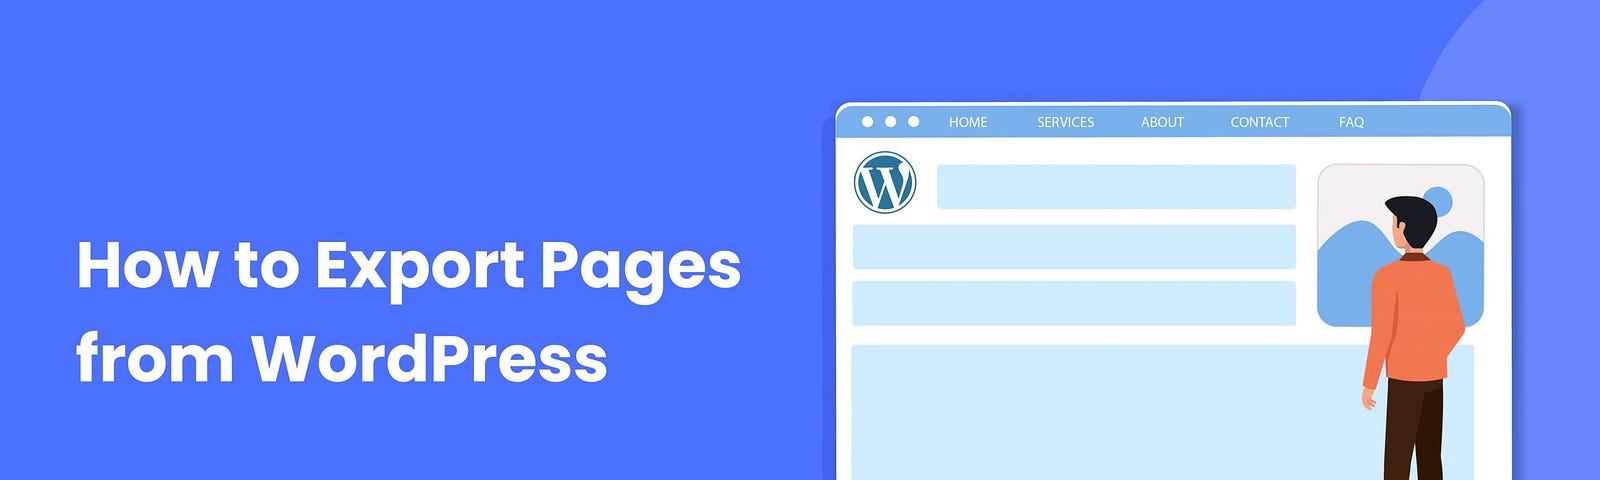 how-to-export-pages-from-wordpress